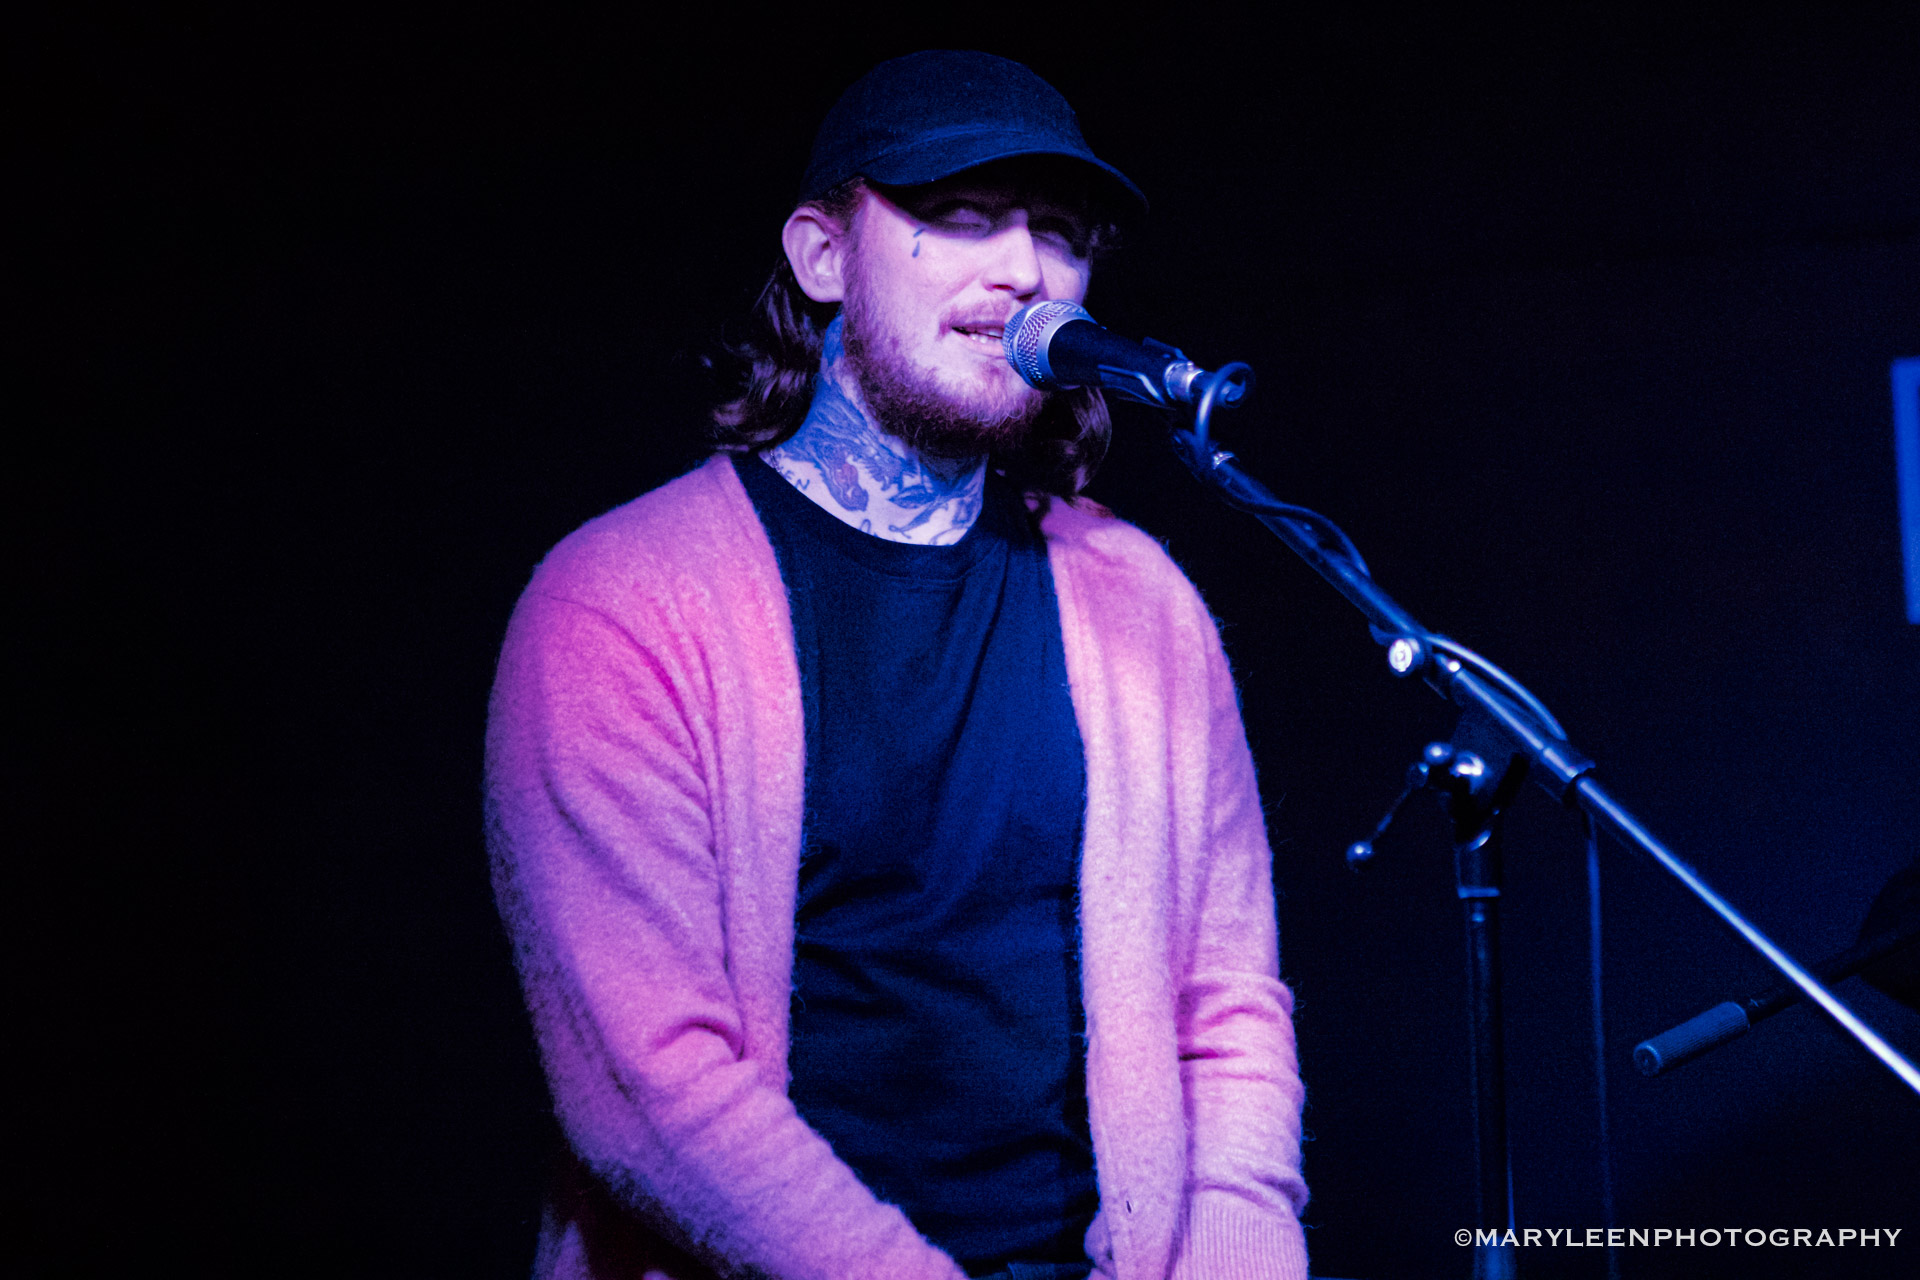 Frank Carter & The Rattlesnakes by Maryleen Photography